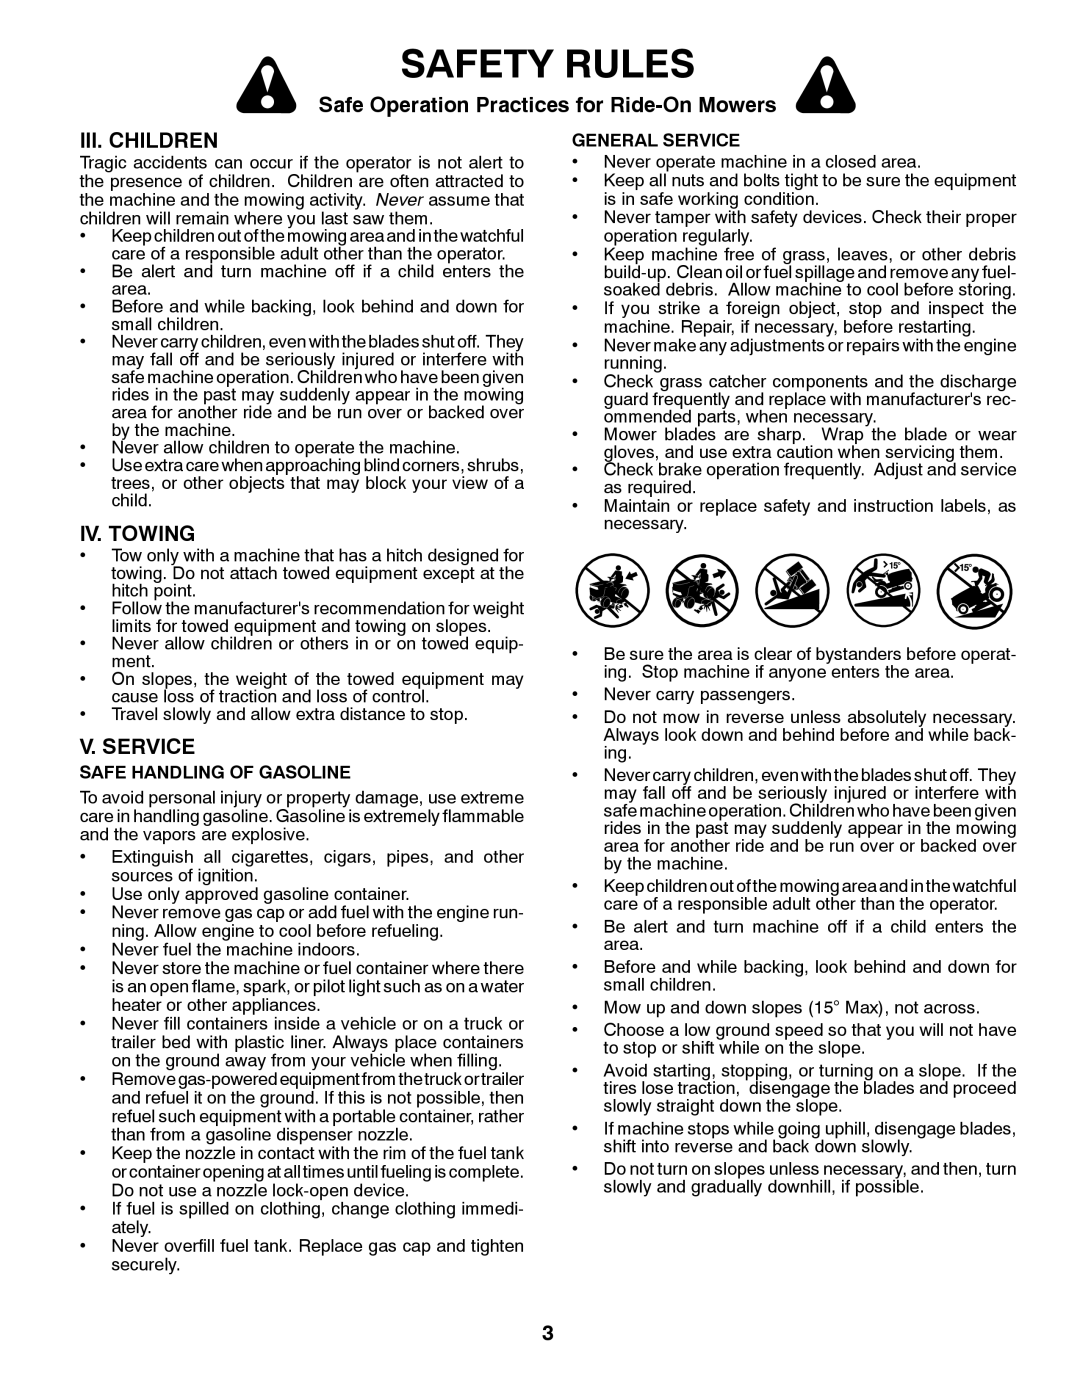 Husqvarna GTH2648 Iii. Children, Iv. Towing, V. Service, Safety Rules, Safe Operation Practices for Ride-OnMowers 